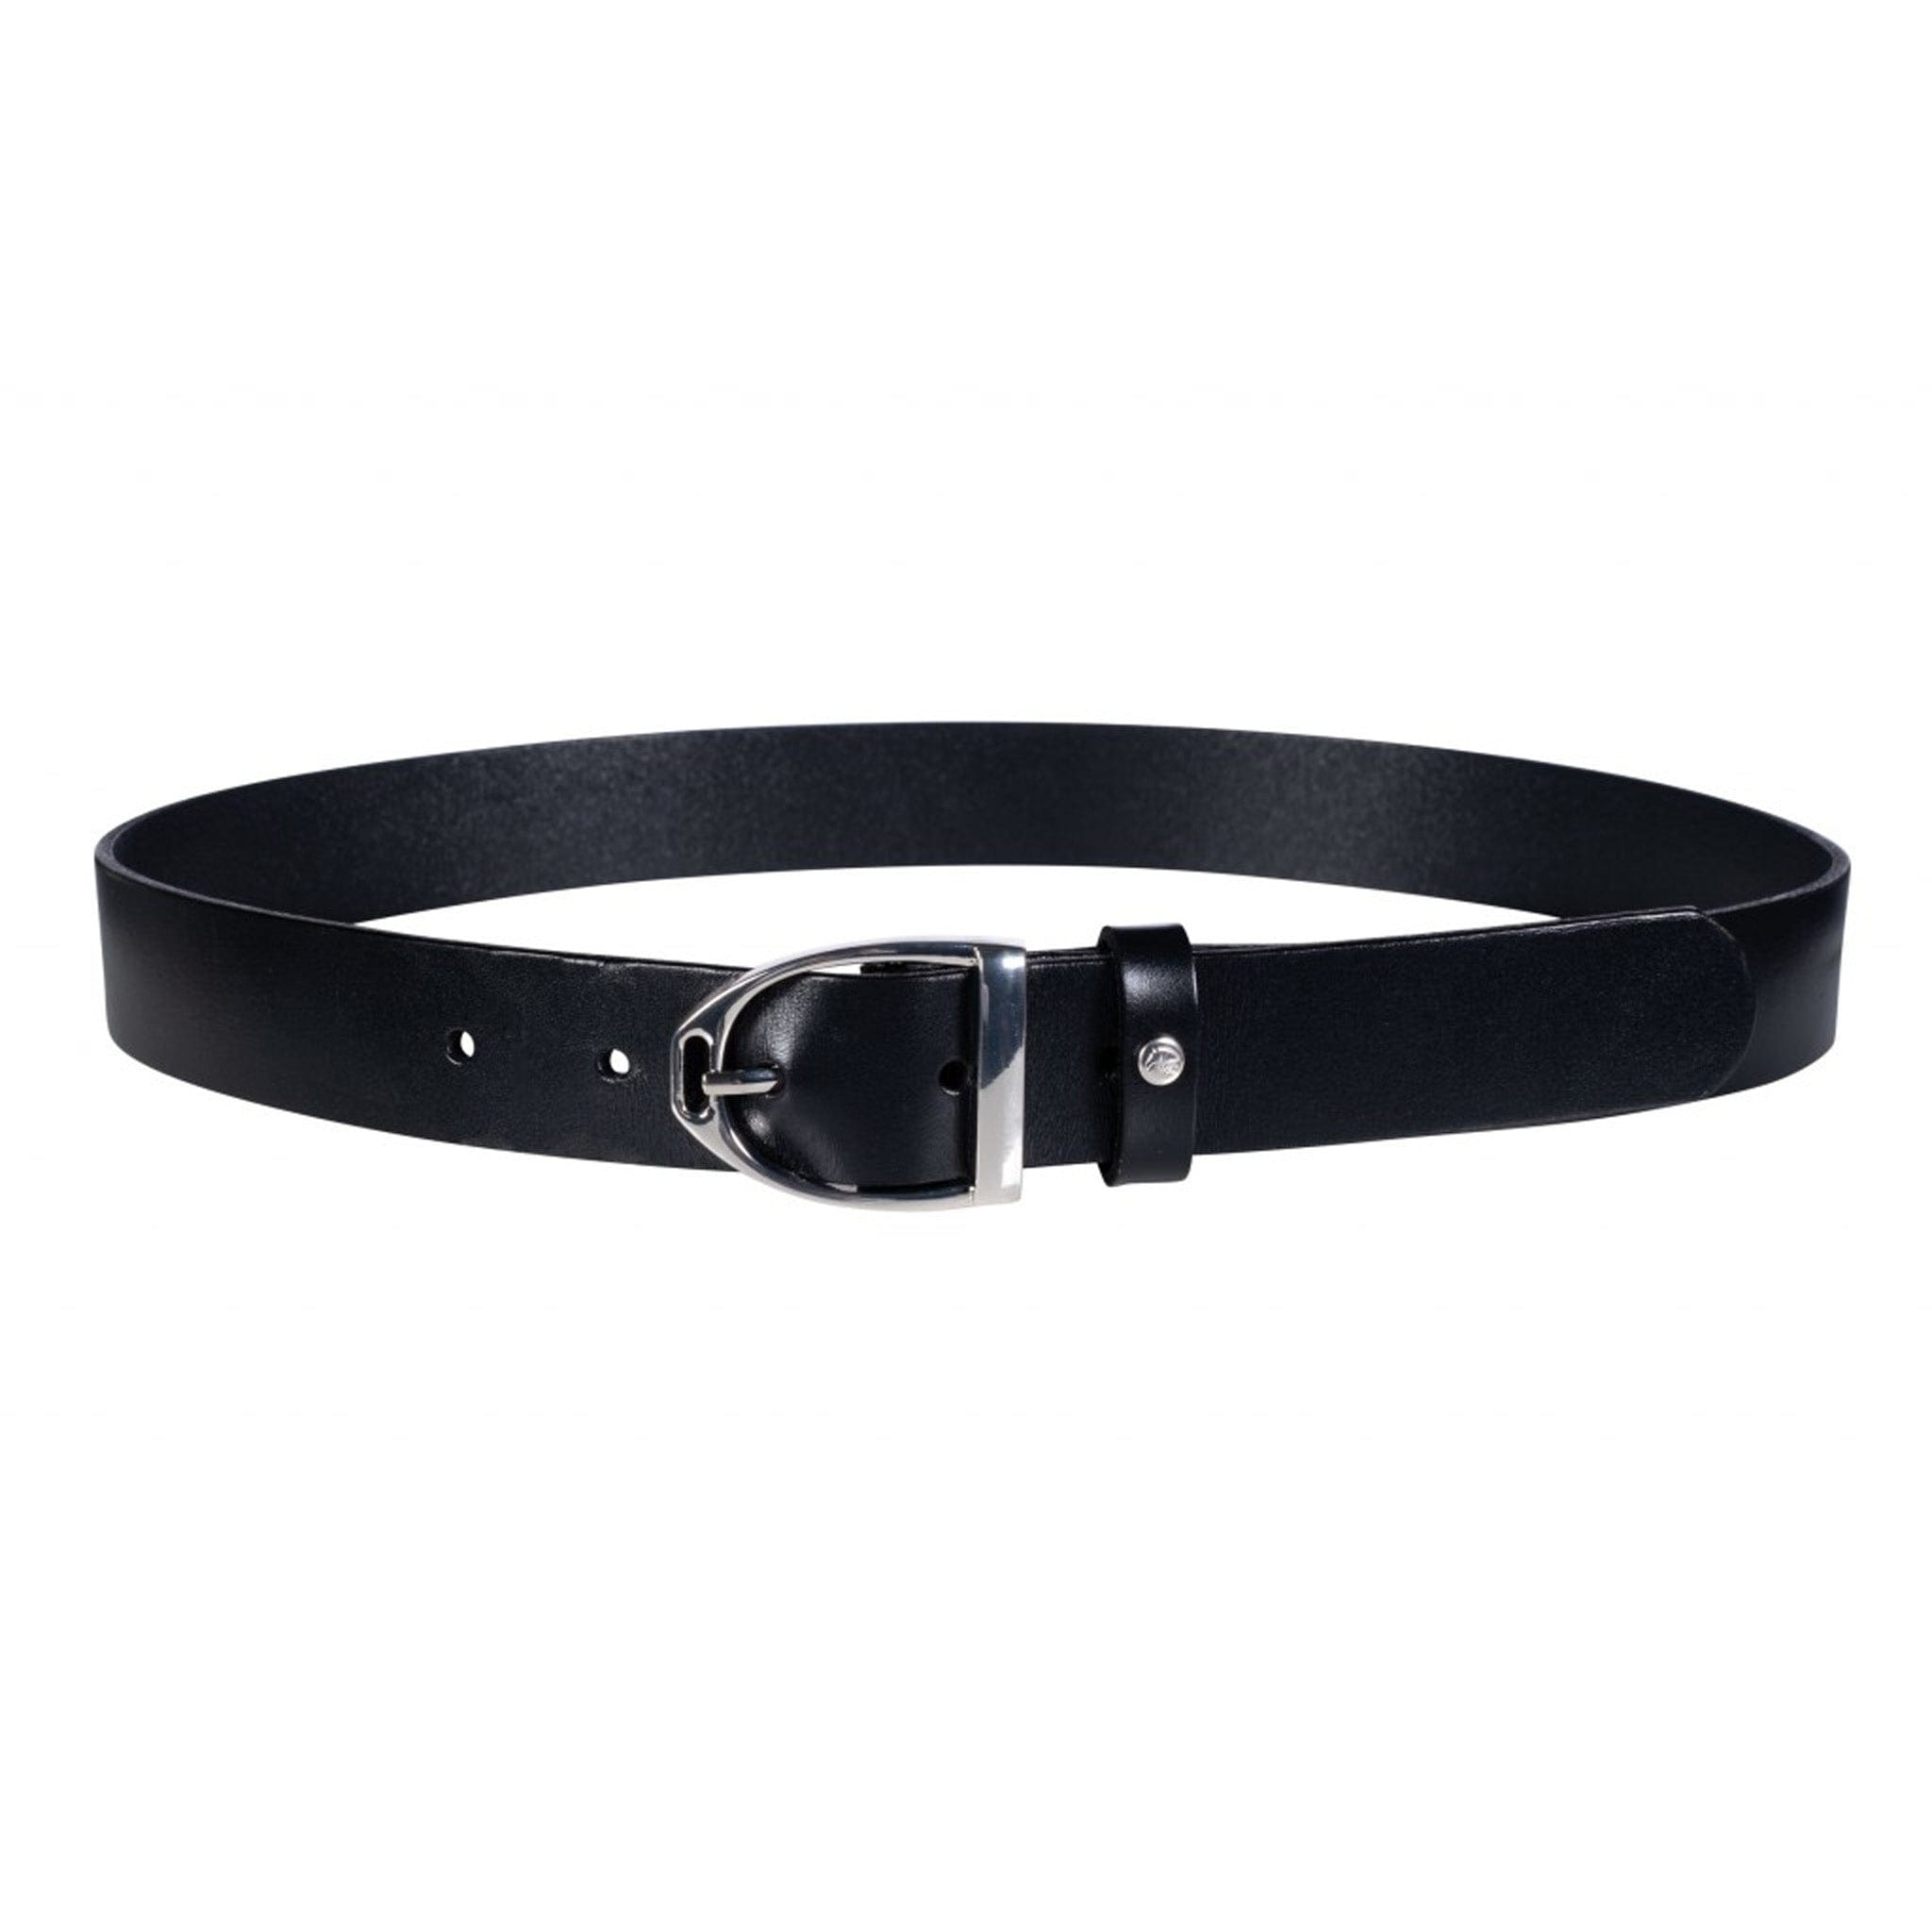 HKM Beth Leather Belt 13372 Black and Silver